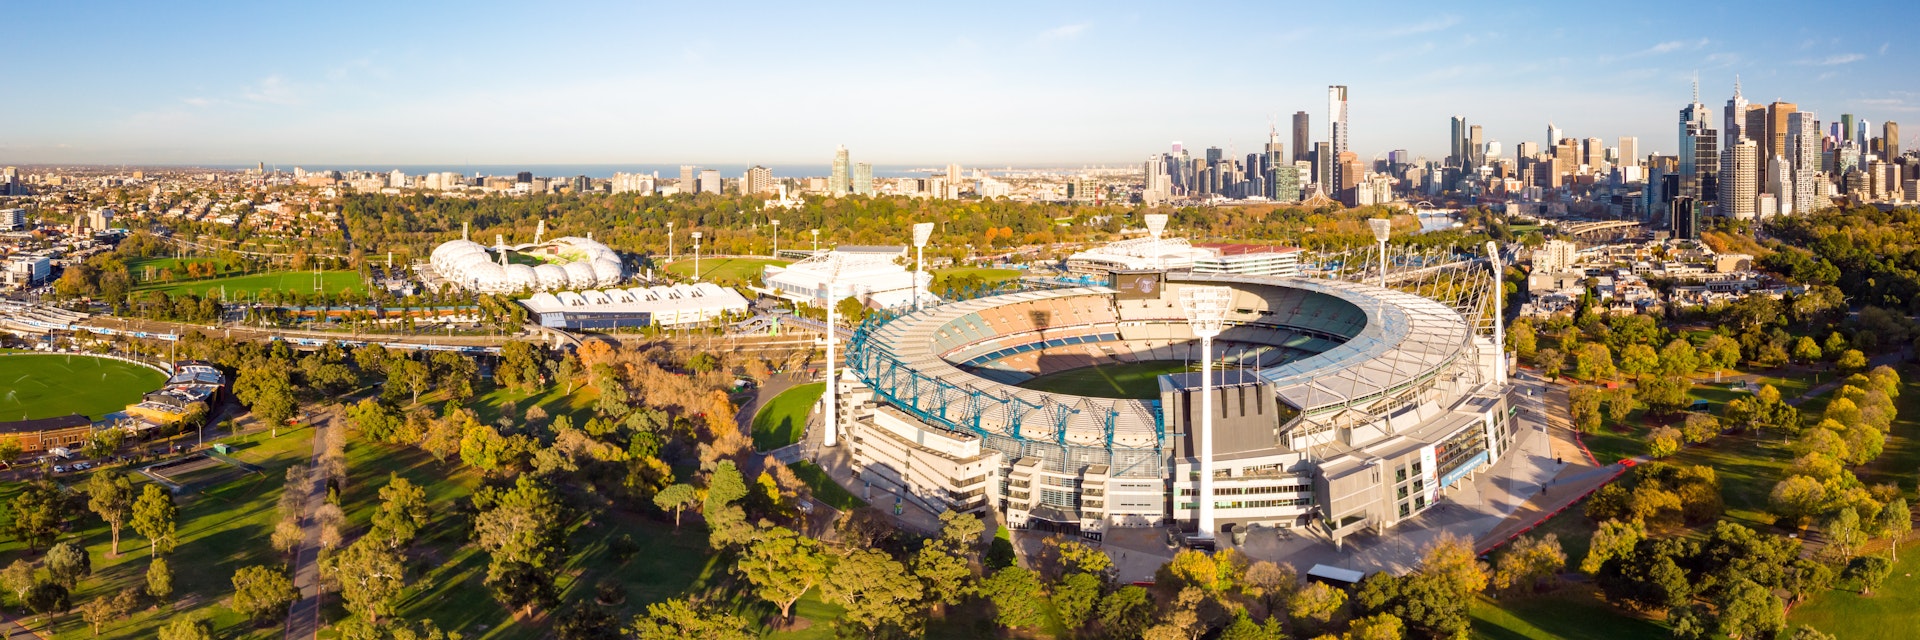 MELBOURNE, AUSTRALIA - MAY 30: Melbourne's famous skyline with Melbourne Cricket Ground stadium in the foreground on a cool autumn morning in Melbourne, Victoria, Australia on May 30th 2018.